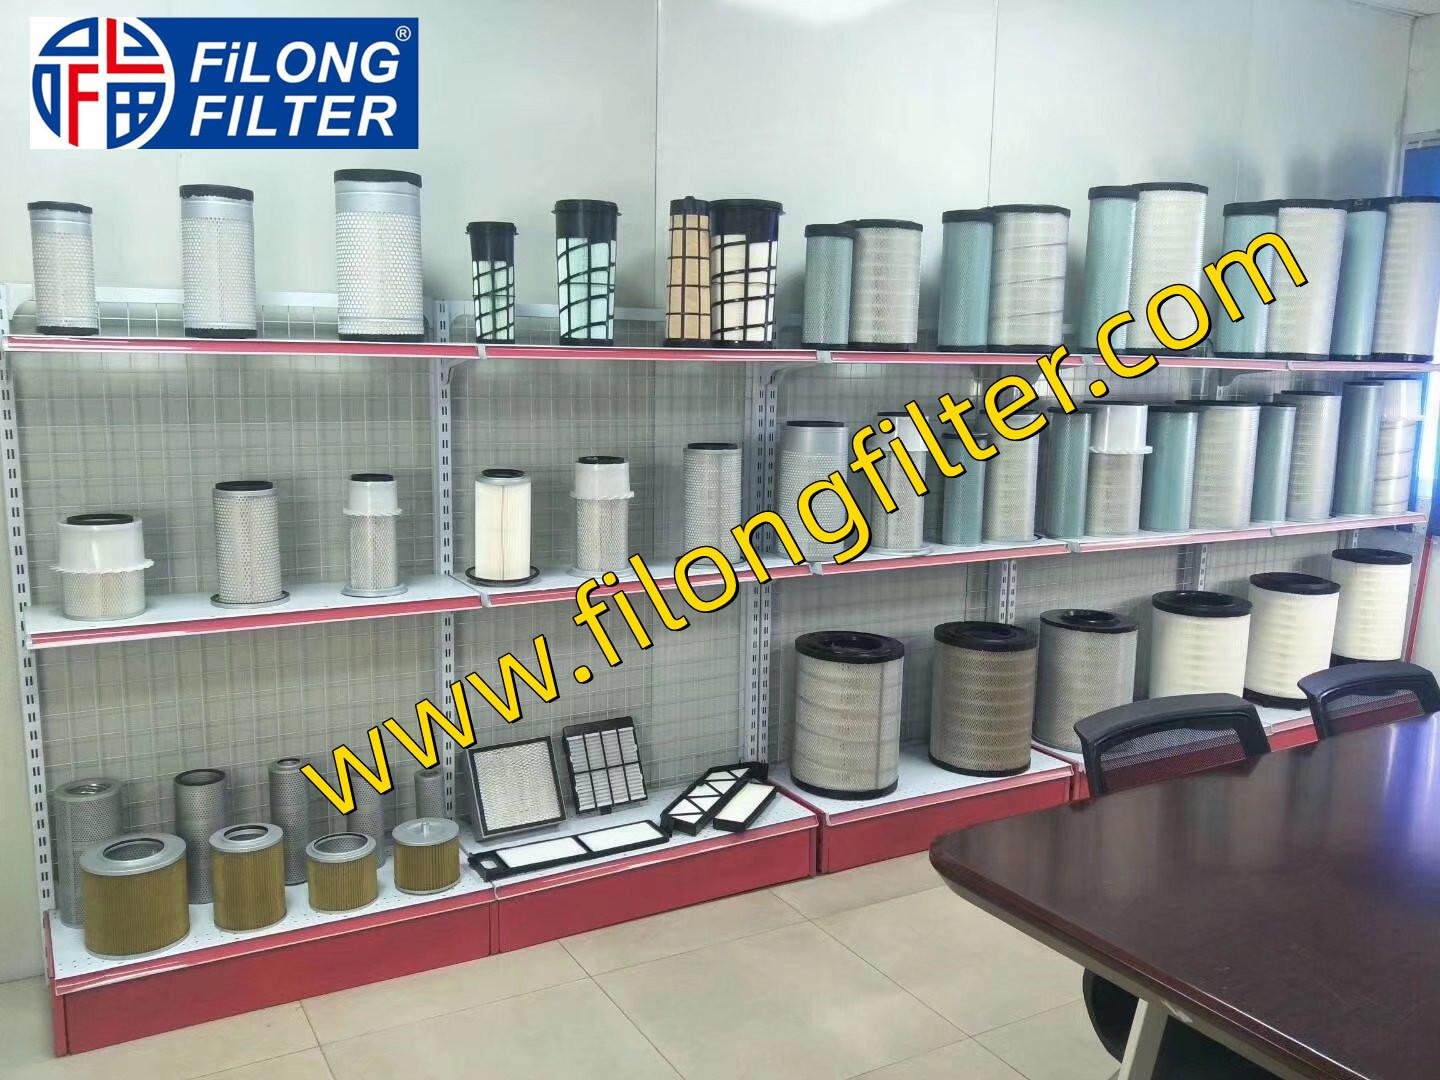 FILONG hydraulic filter Manufacturers in China, truck filters manufactory in china , hydraulic filter manufactory in china , truck parts supplier in china